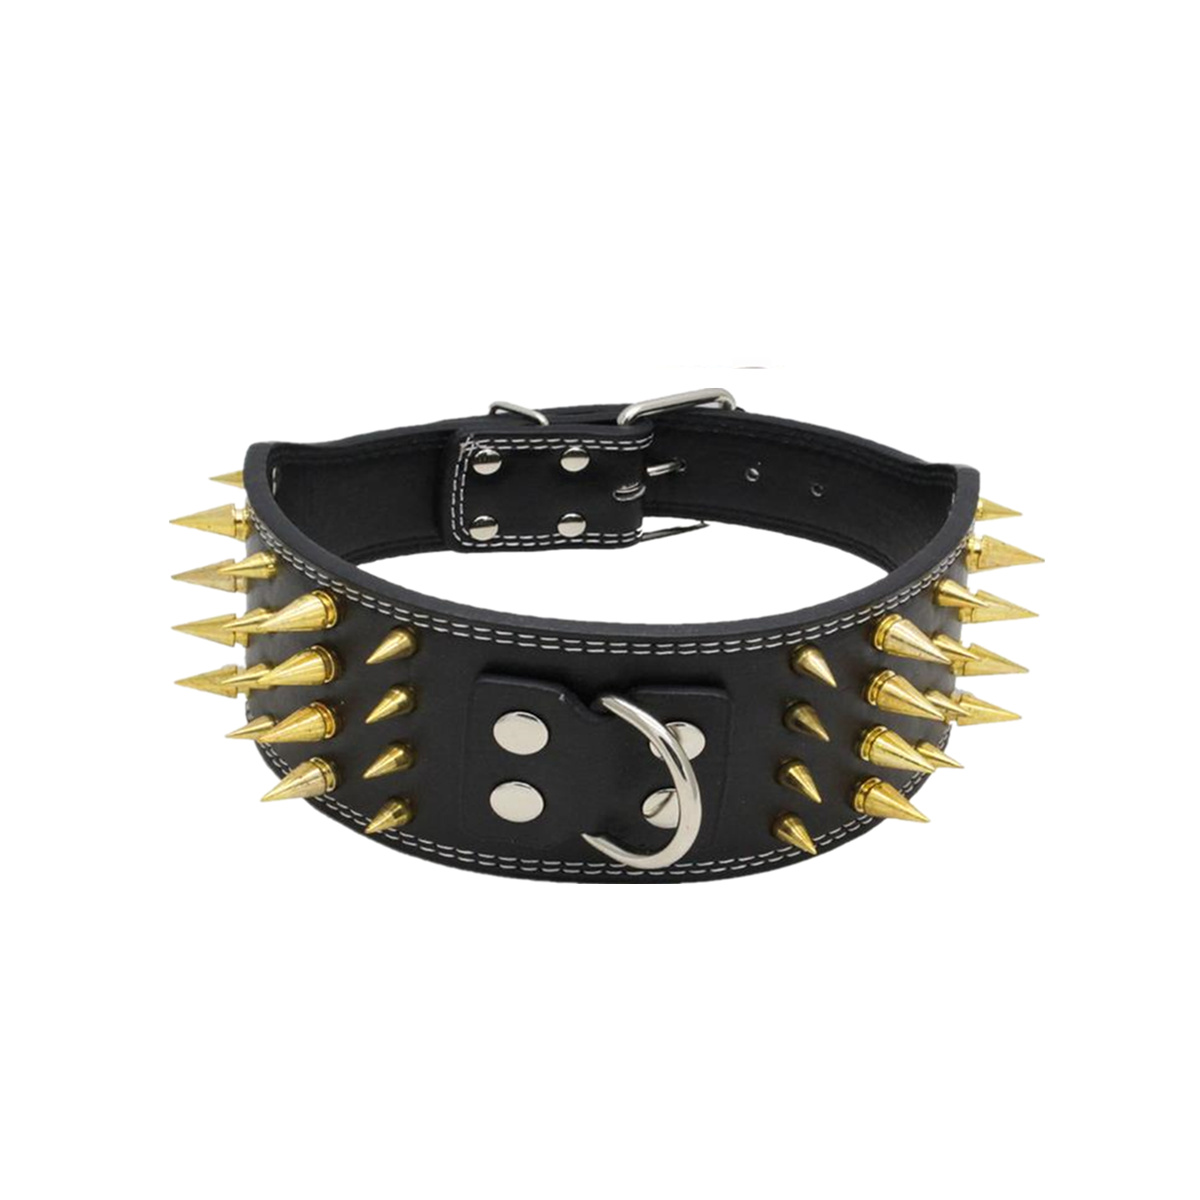 Four-Rows-of-Black-Nail-Anti-bite-Tactical-Collar-Large-Pet-Dog-Chain-Hunting-Dog-Supplies-1398082-7